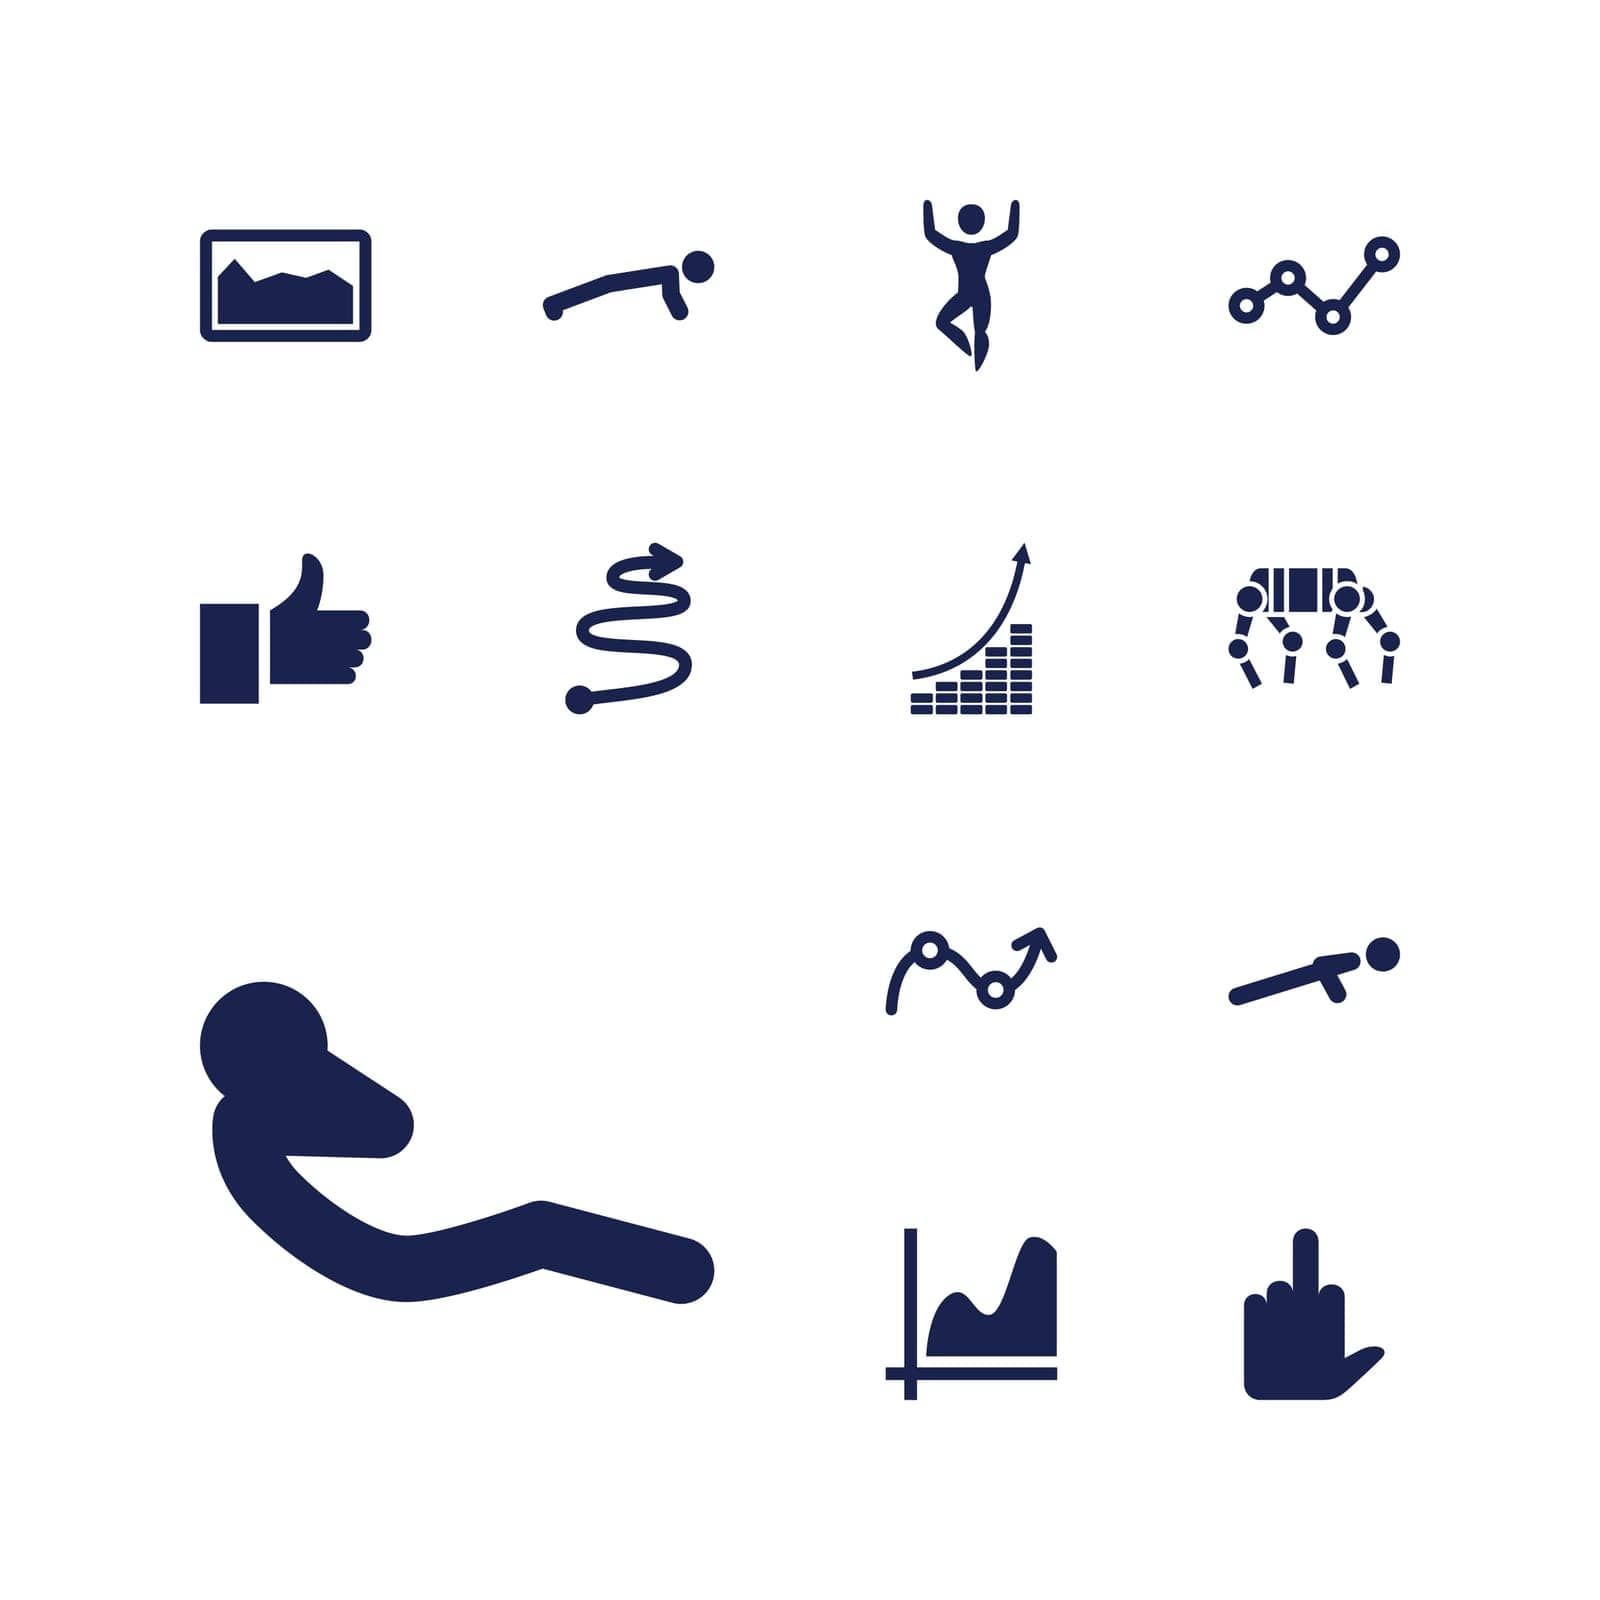 symbol,doing,curved,data,arrow,thumb,financial,concept,stairs,icon,sign,isolated,white,exercises,web,flat,design,vector,man,up,graphic,finger,set,middle,business,black,abdoninal,people,graph,push,money,workout,background,success,growth,illustration,chart,finance